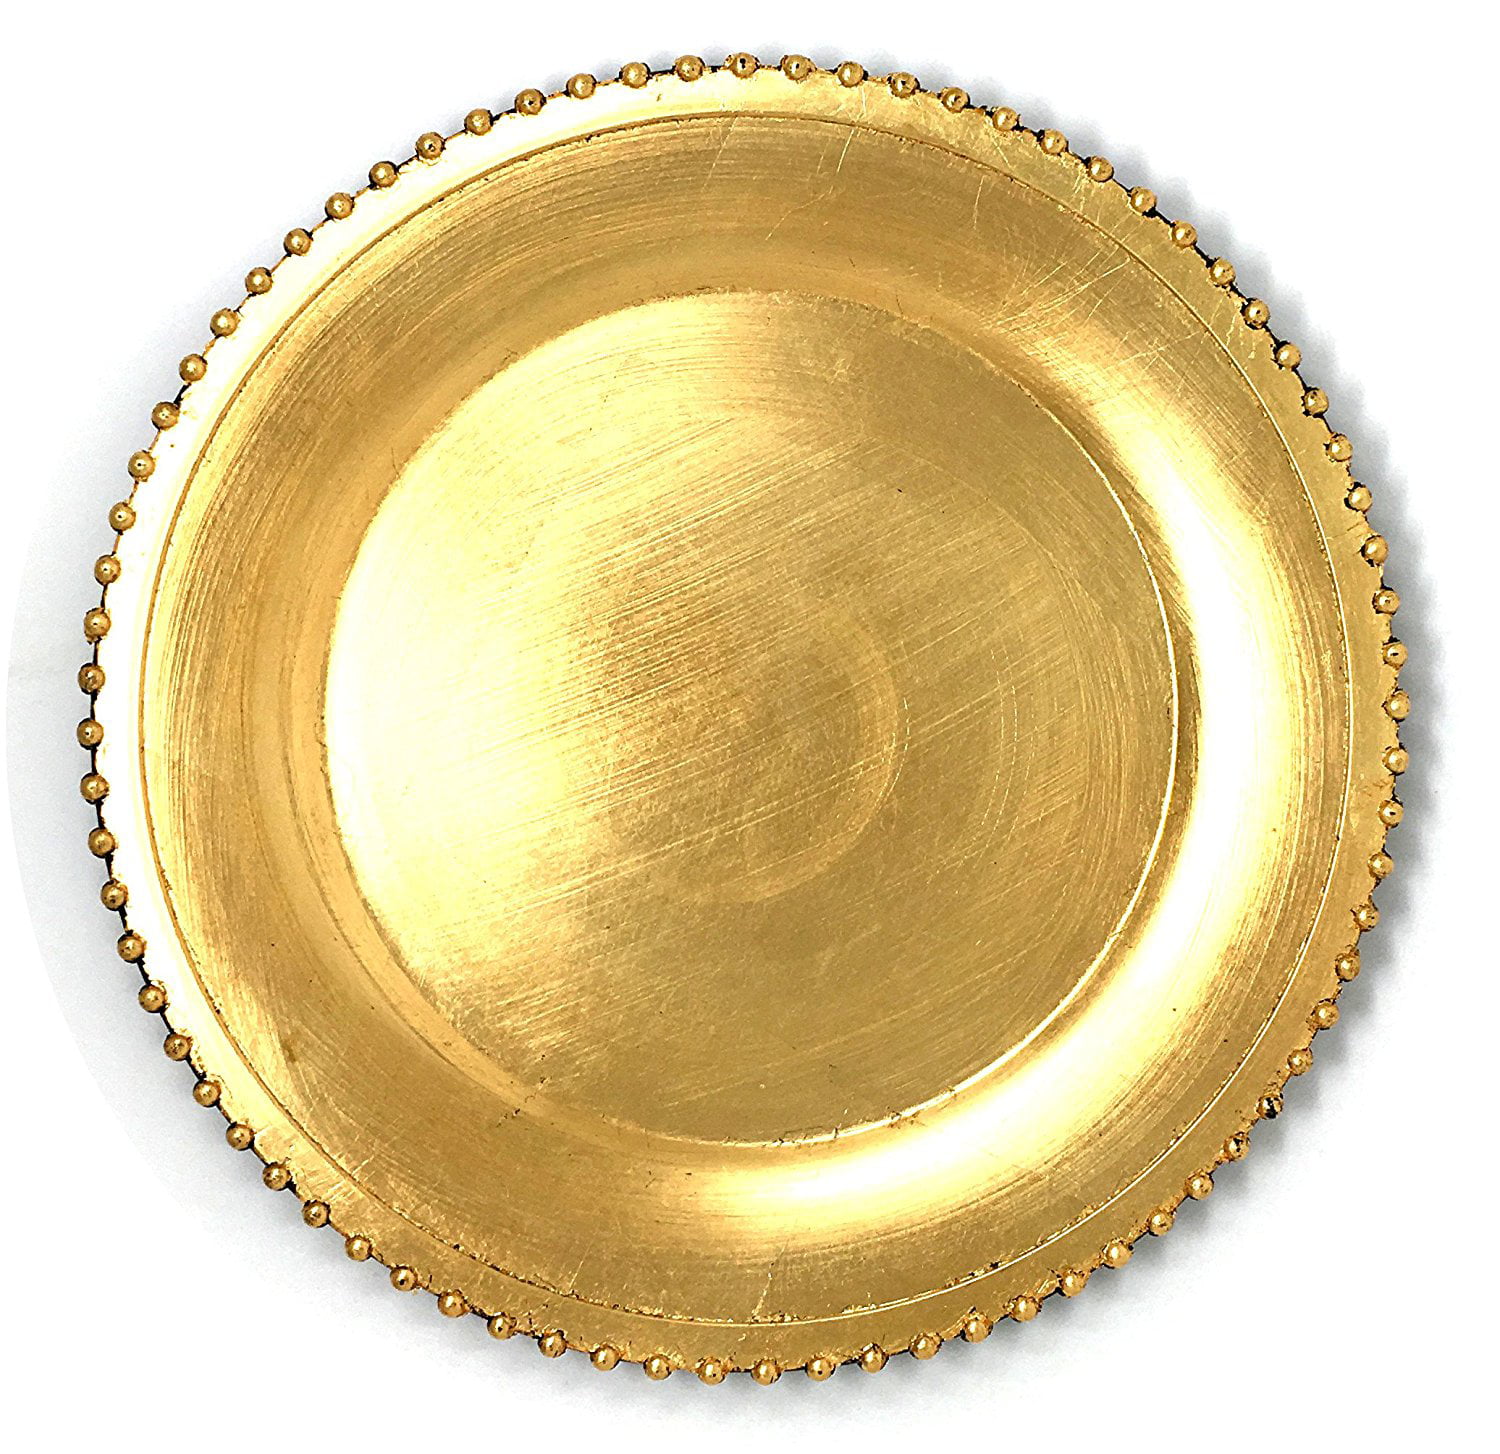 Gold rounds